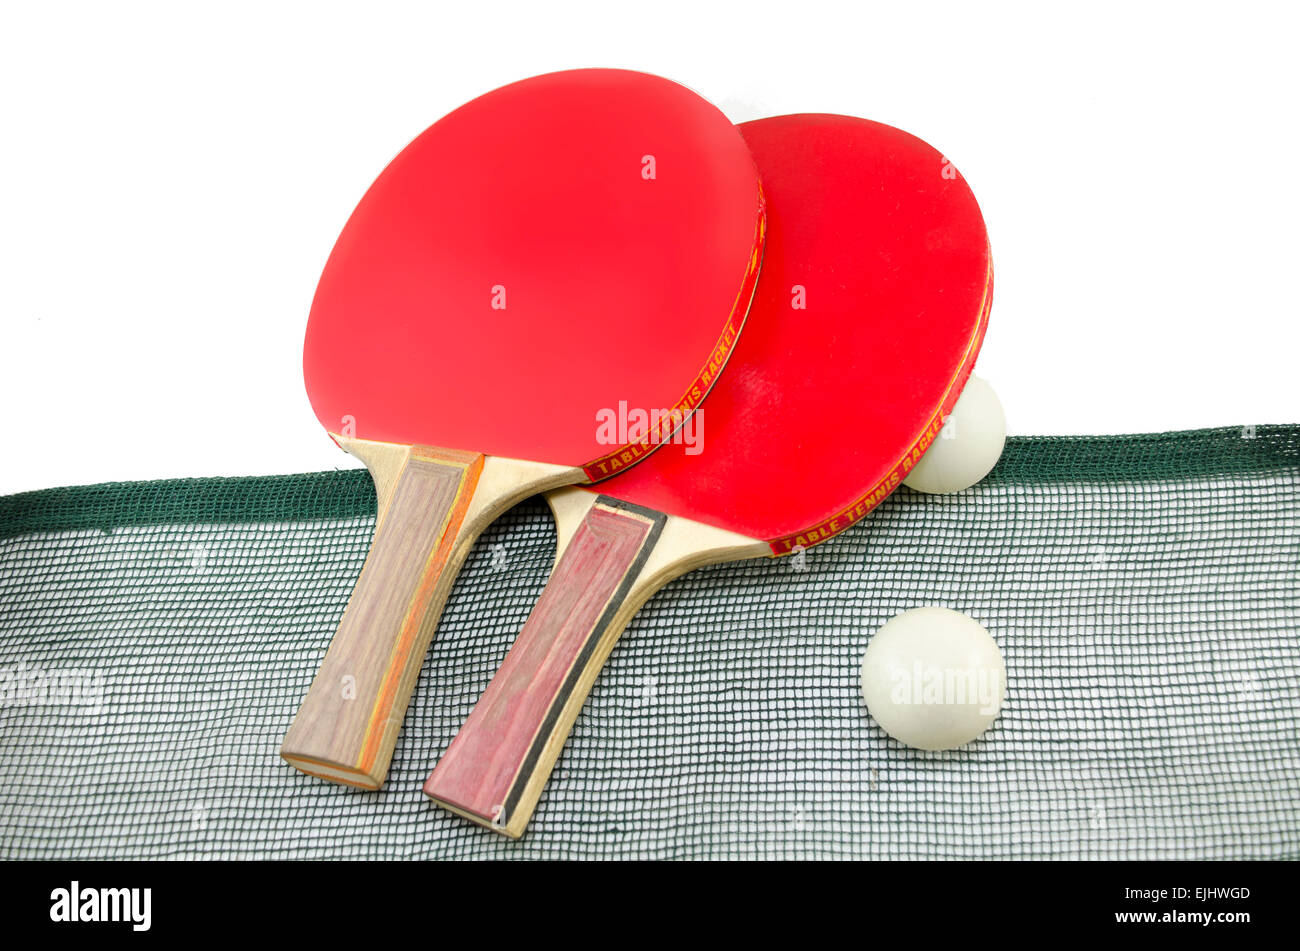 Two red table tennis rackets and a net isolated on white Stock Photo